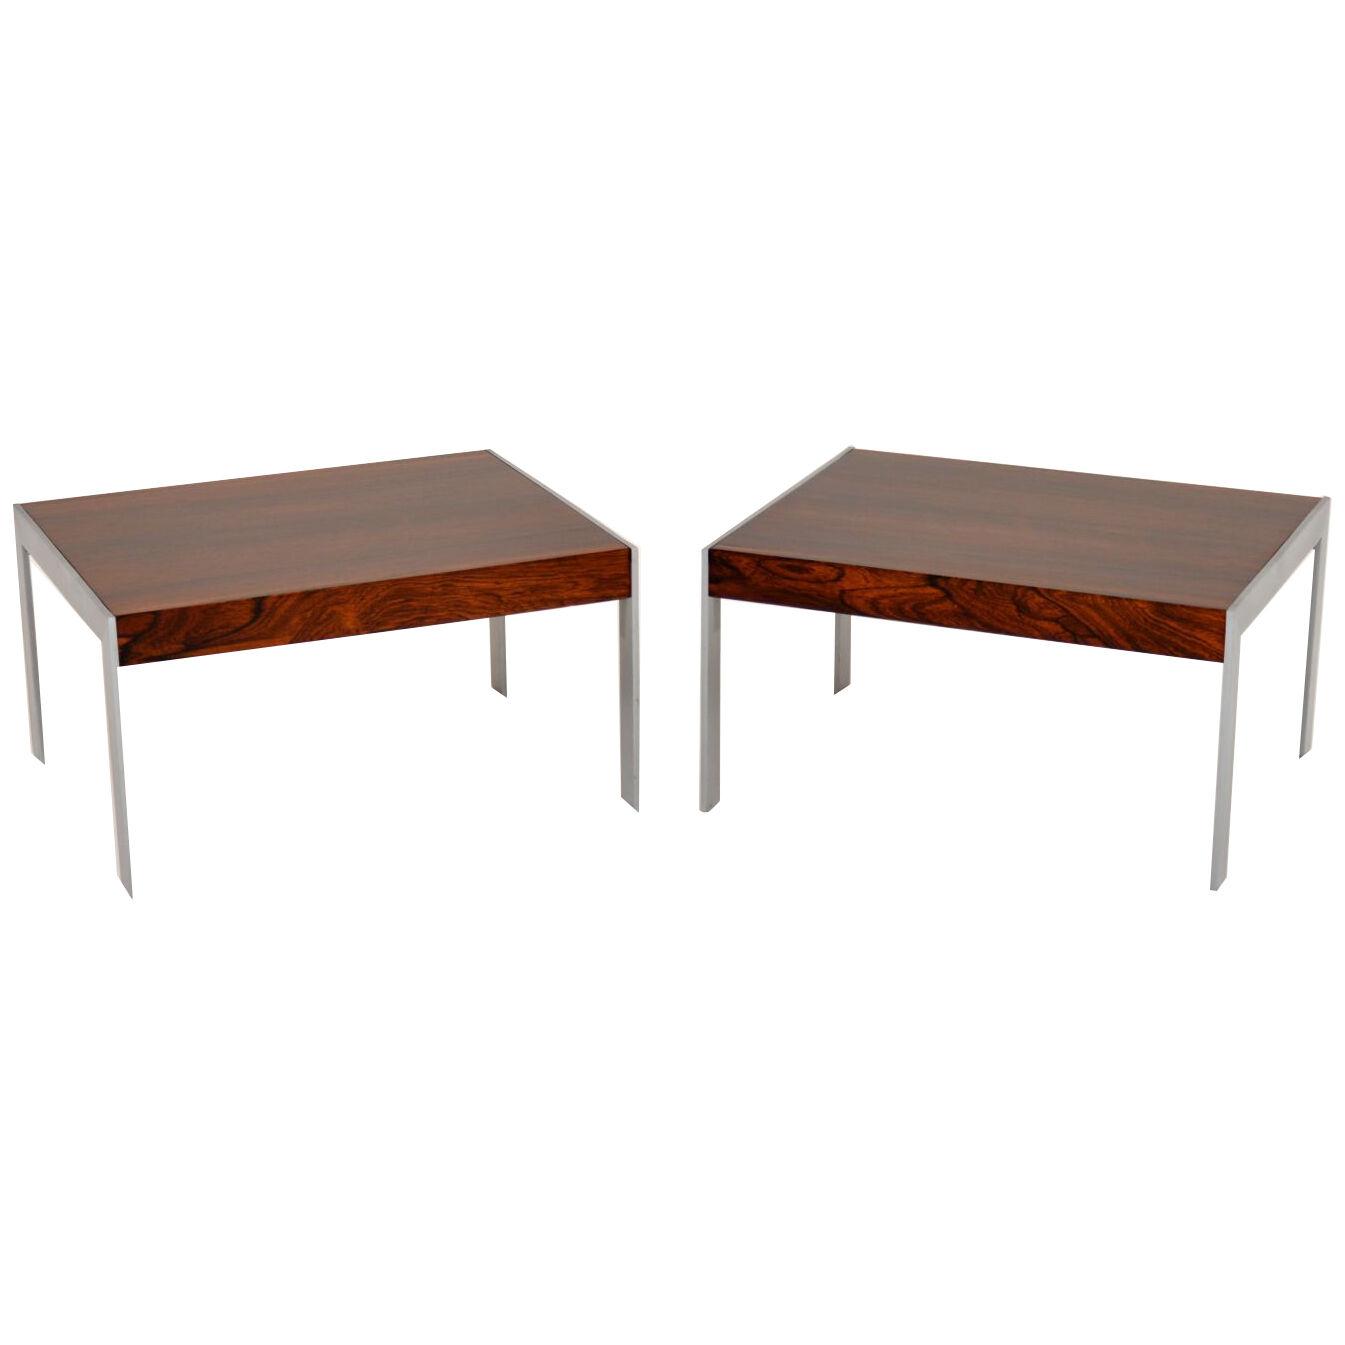 1970's Pair of Rosewood & Chrome Side Tables by Merrow Associates